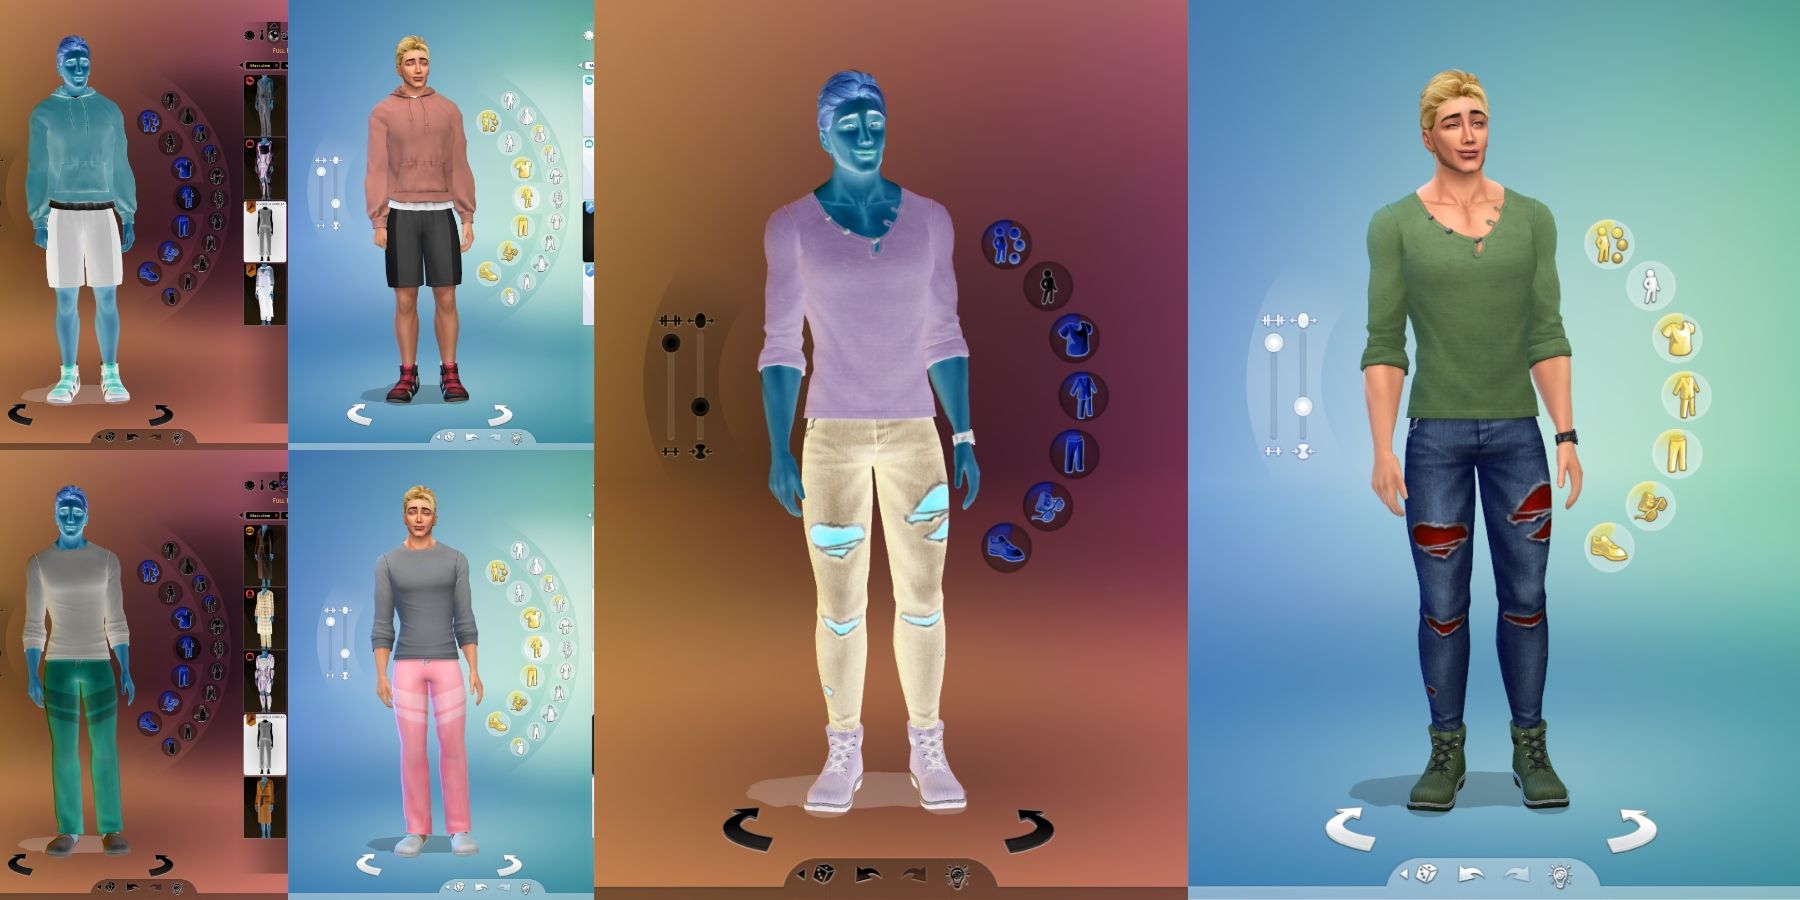 inverted challenge in Cas in the Sims 4